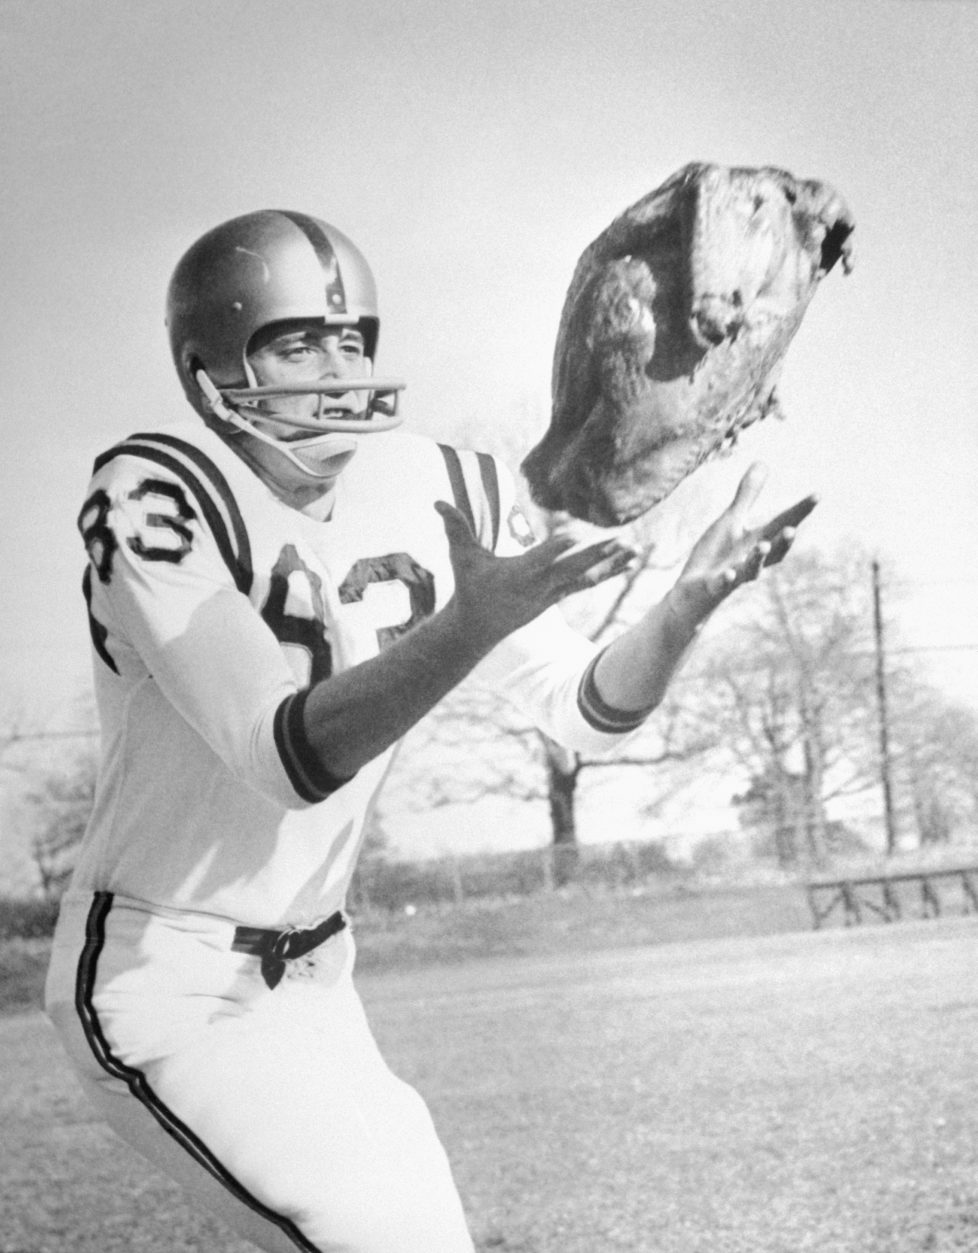 (Original Caption) Pass the Turkey. John Sweatlock, of Ramsey, New Jersey, a Valley Forge Military Academy end, reaches to grab a roasted turkey tossed to him in jest during football practice on the Wayne, Pa., campus. "Well, afterall," the passer said "a pigskin doesn't seem appropriate for Thanksgiving Day."